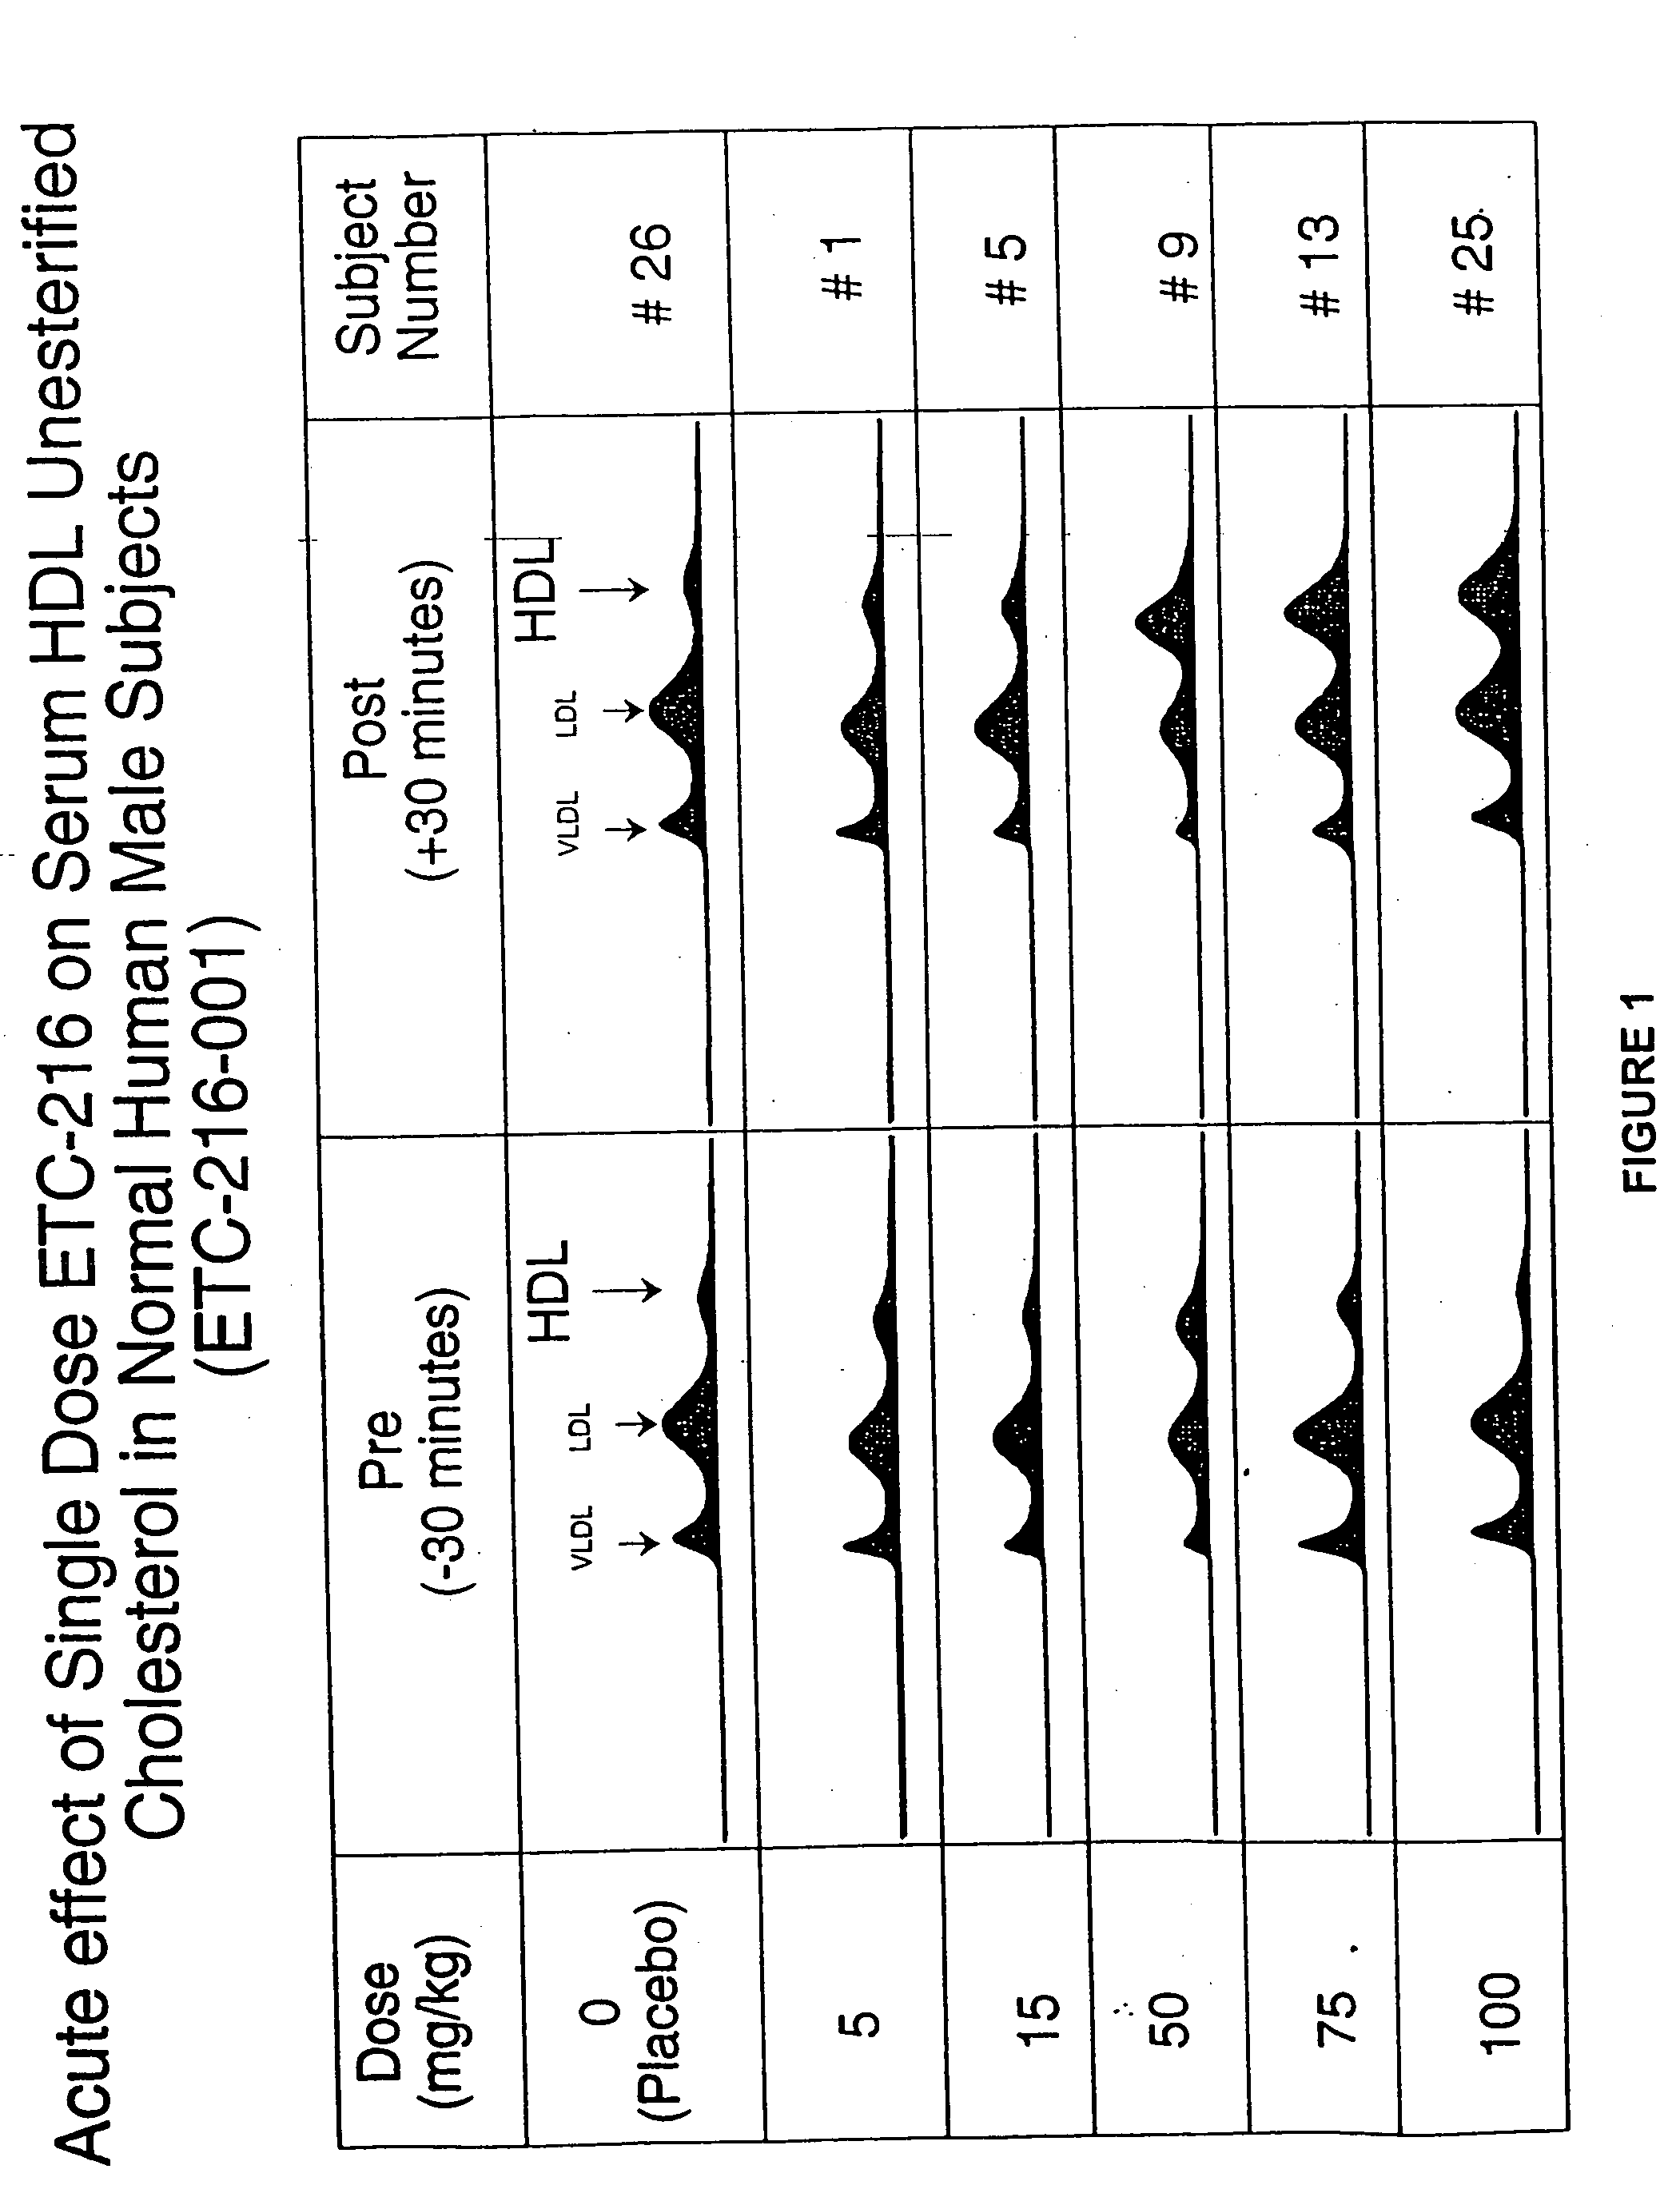 Pharmaceutical formulations, methods, and dosing regimens for the treatment and prevention of acute coronary syndromes